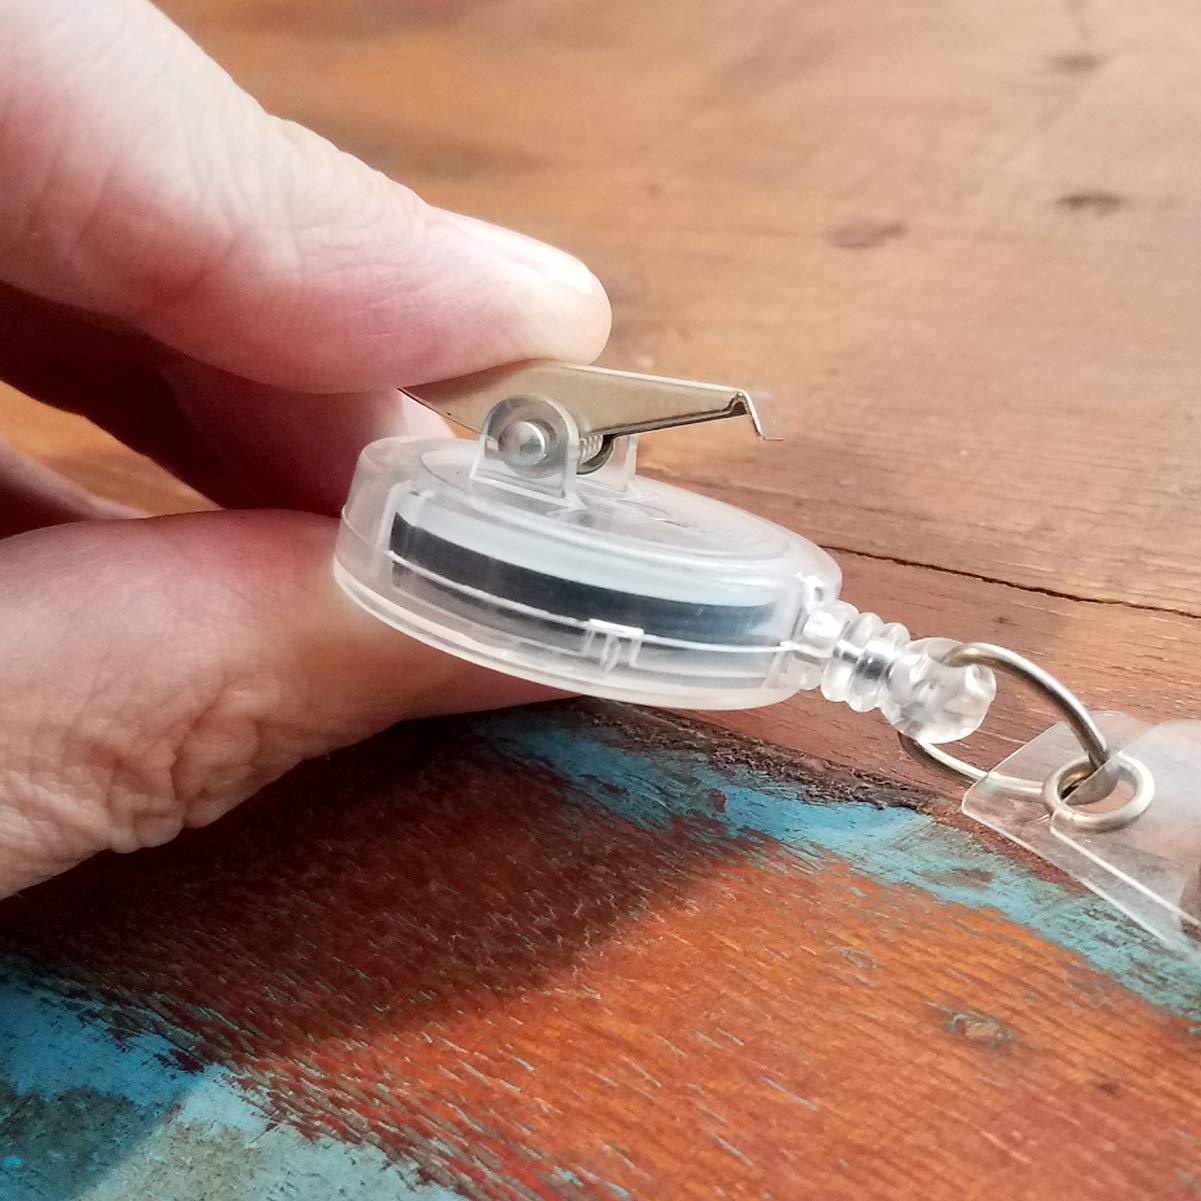  Clear Badge Reel (Translucent) with Swivel Spring